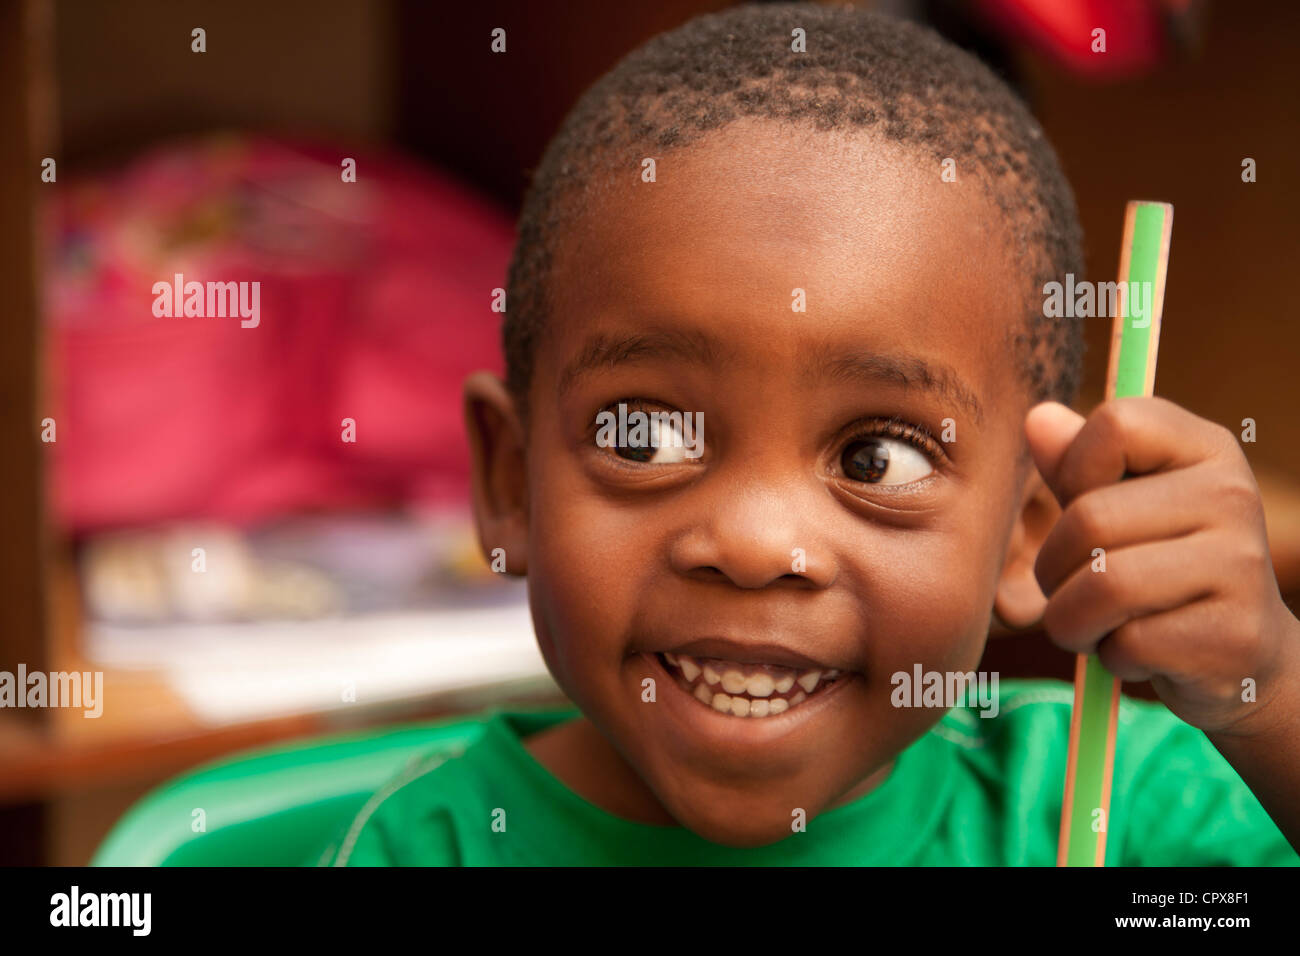 Child holding a pencil crayon, smiling Stock Photo